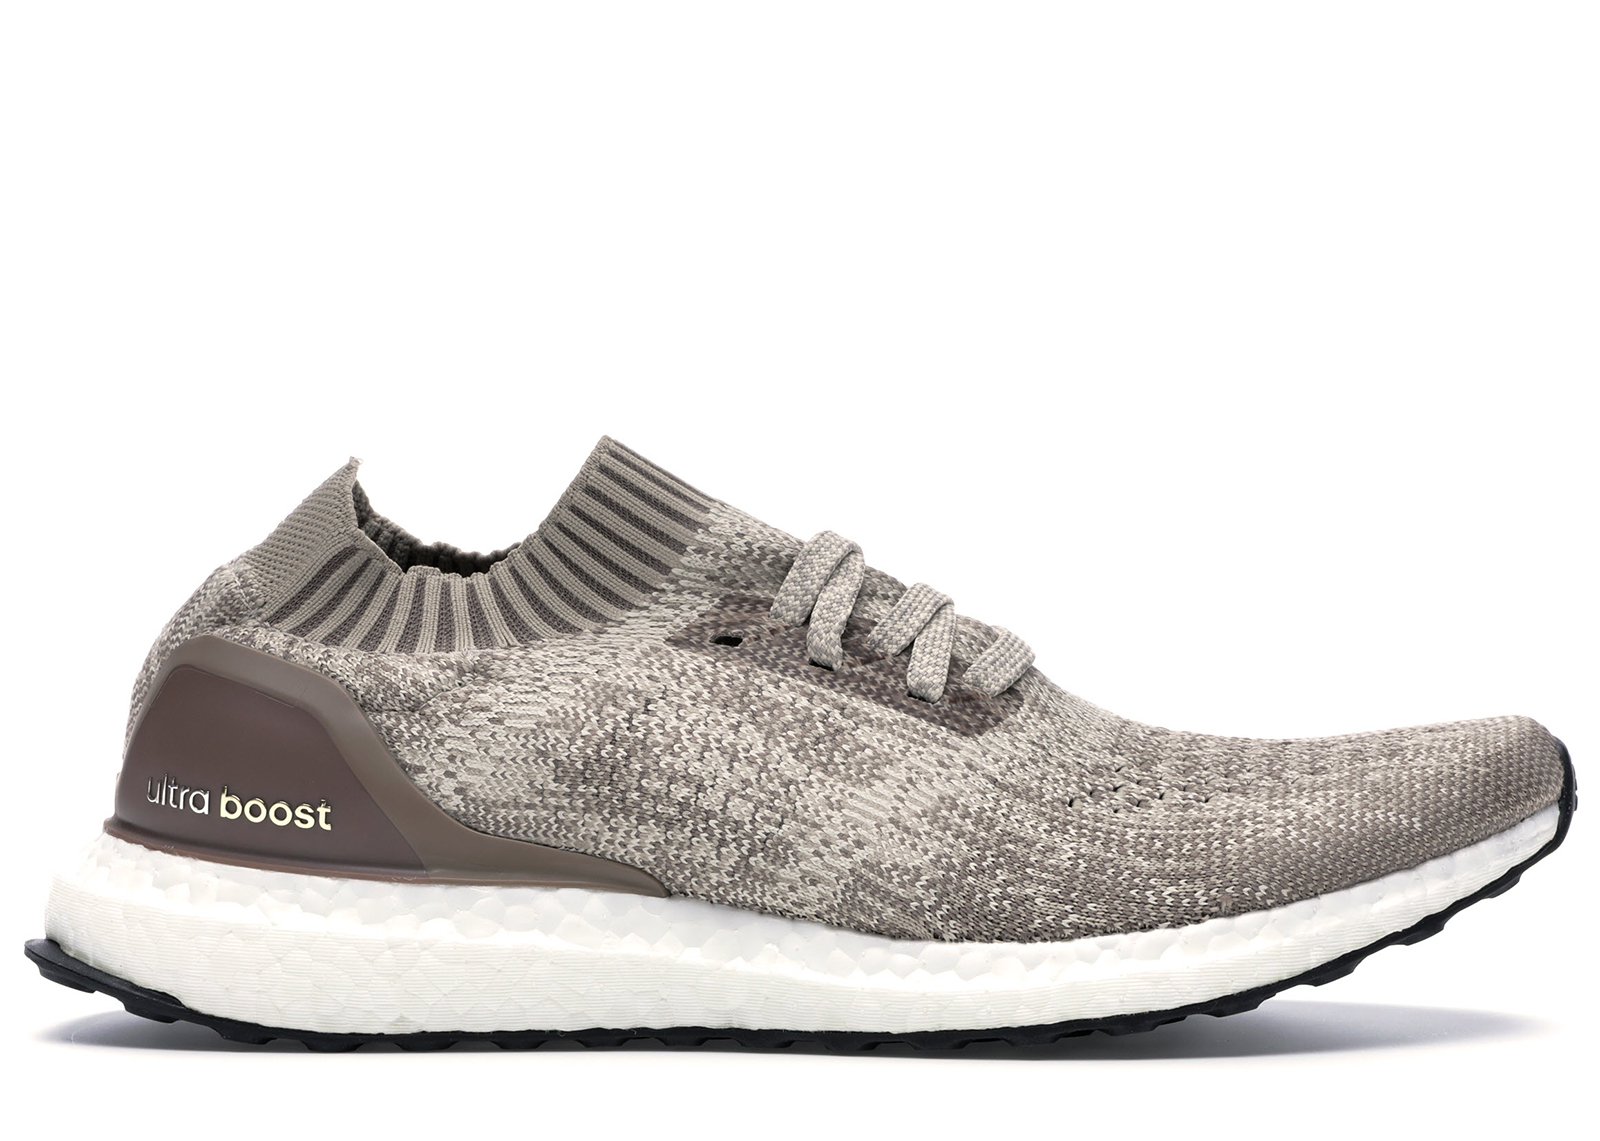 adidas boost brown